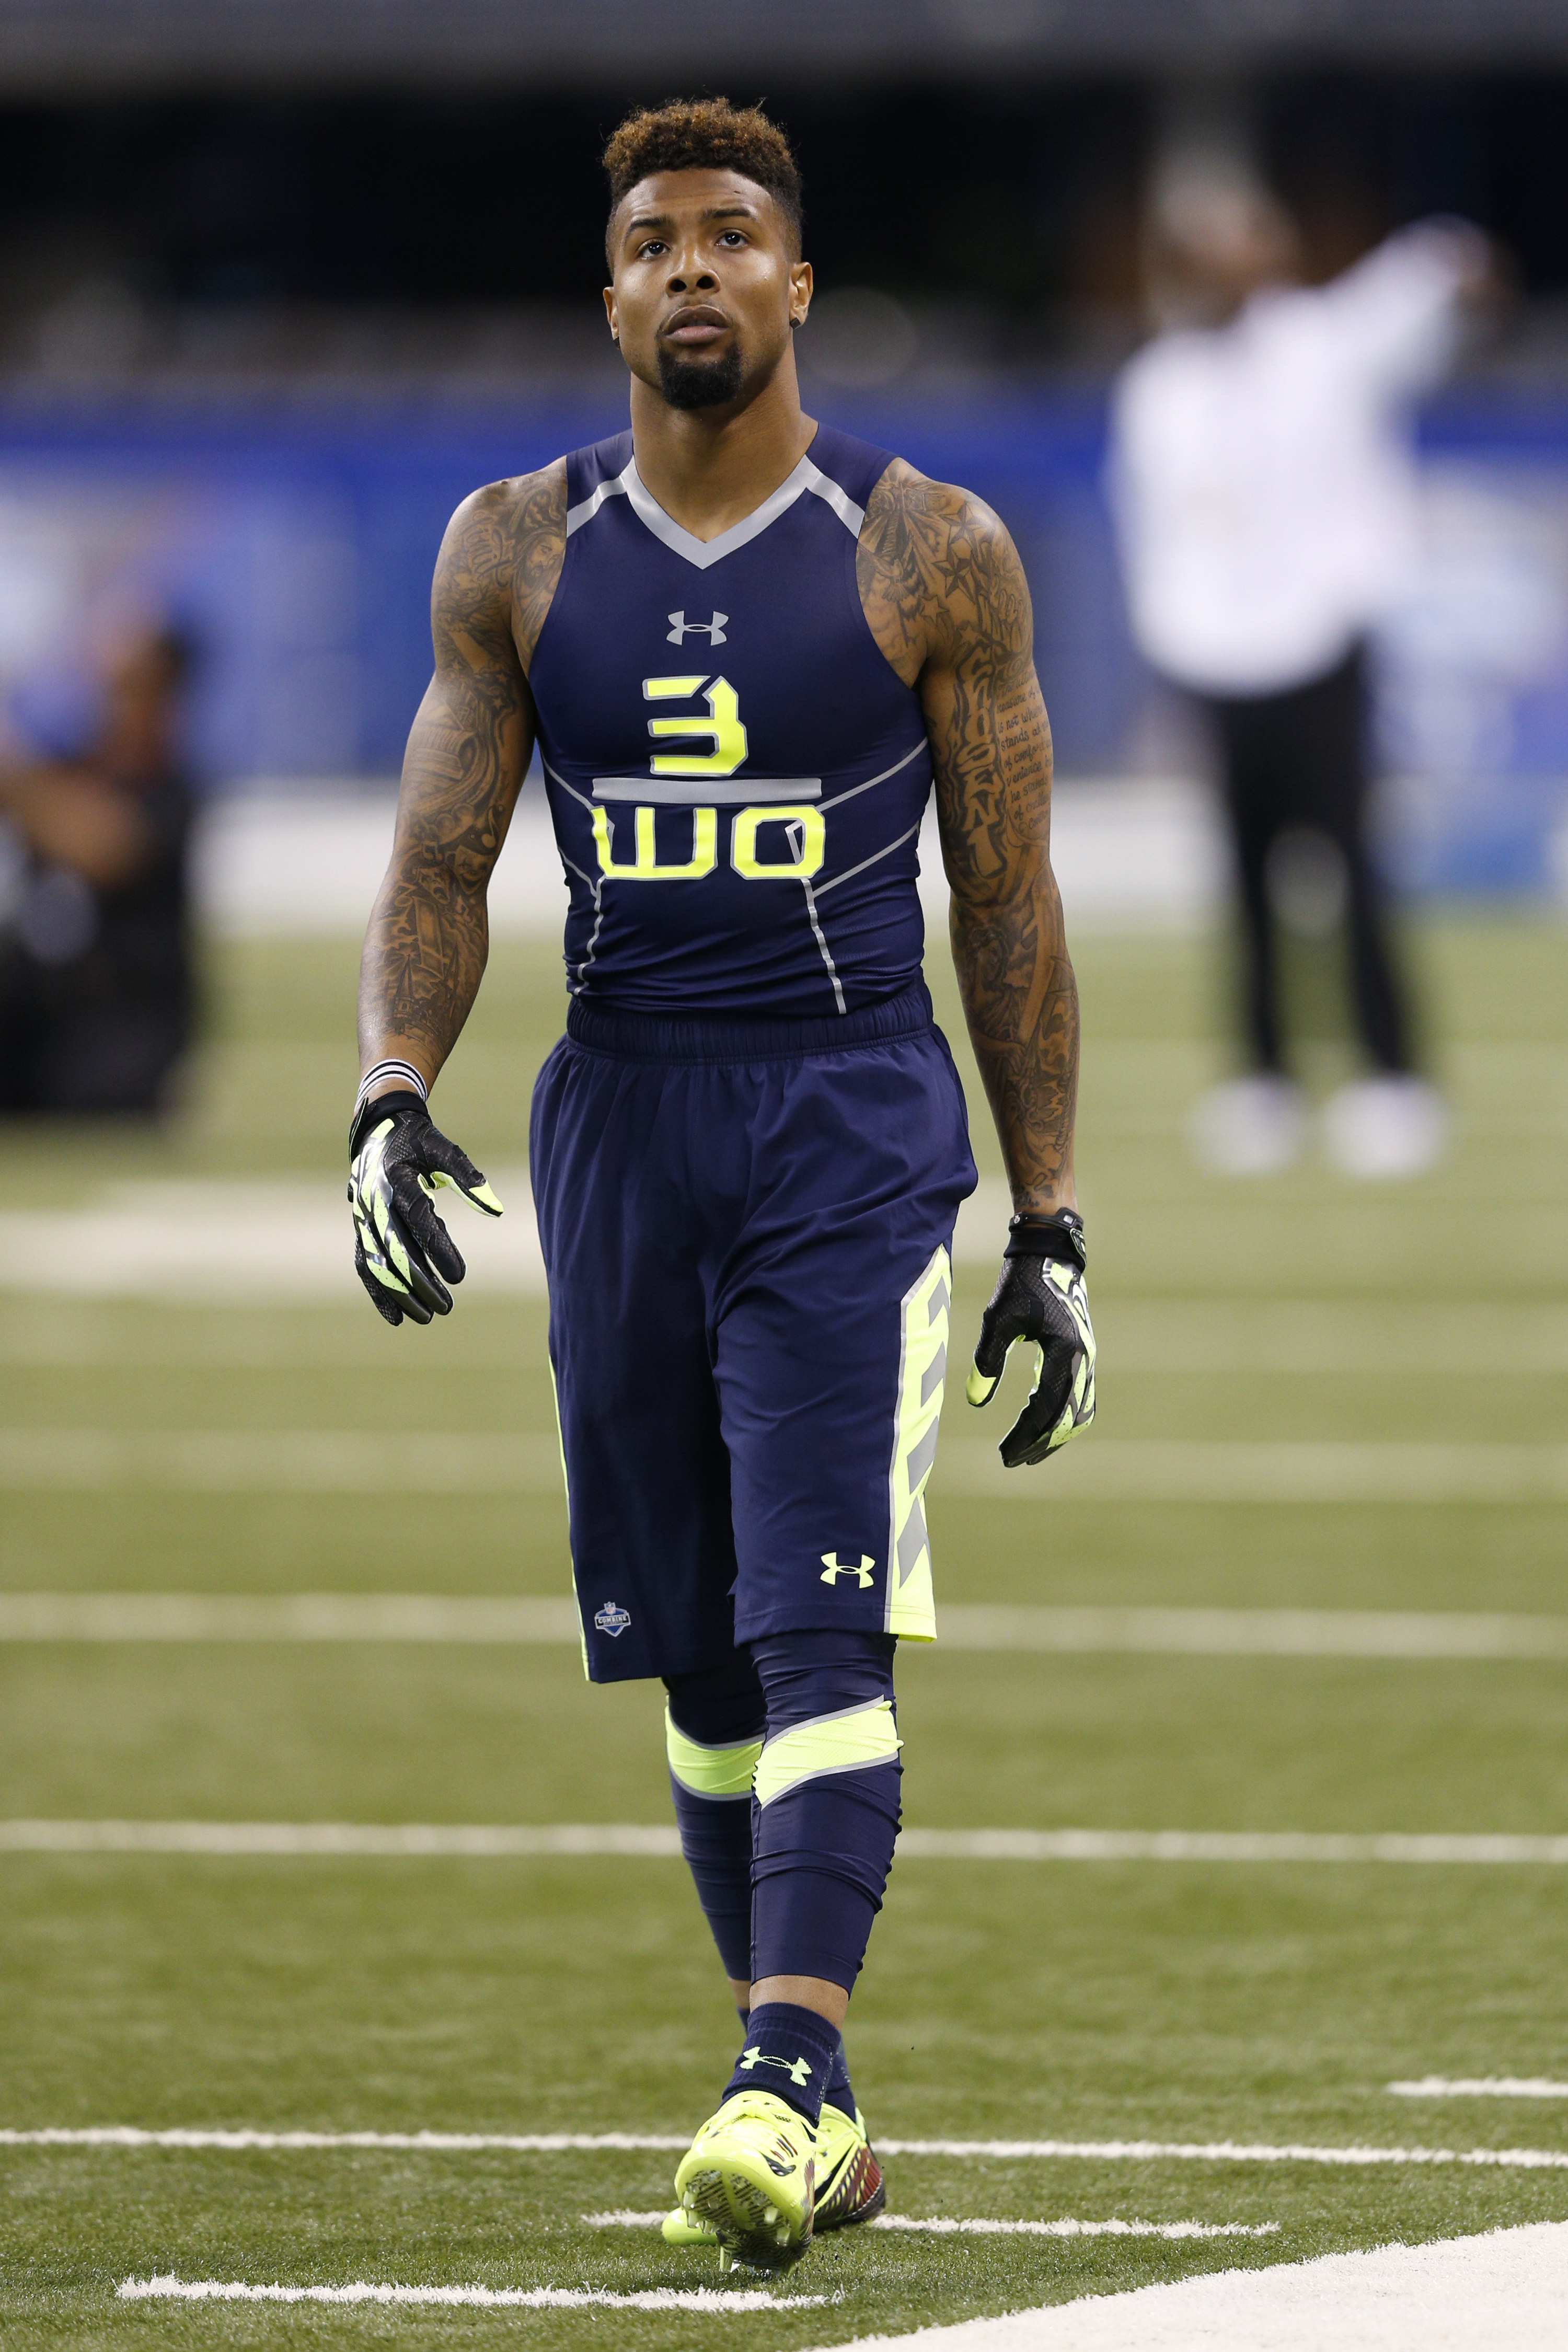 Young Odell Beckham Jr. at the NFL Combine.